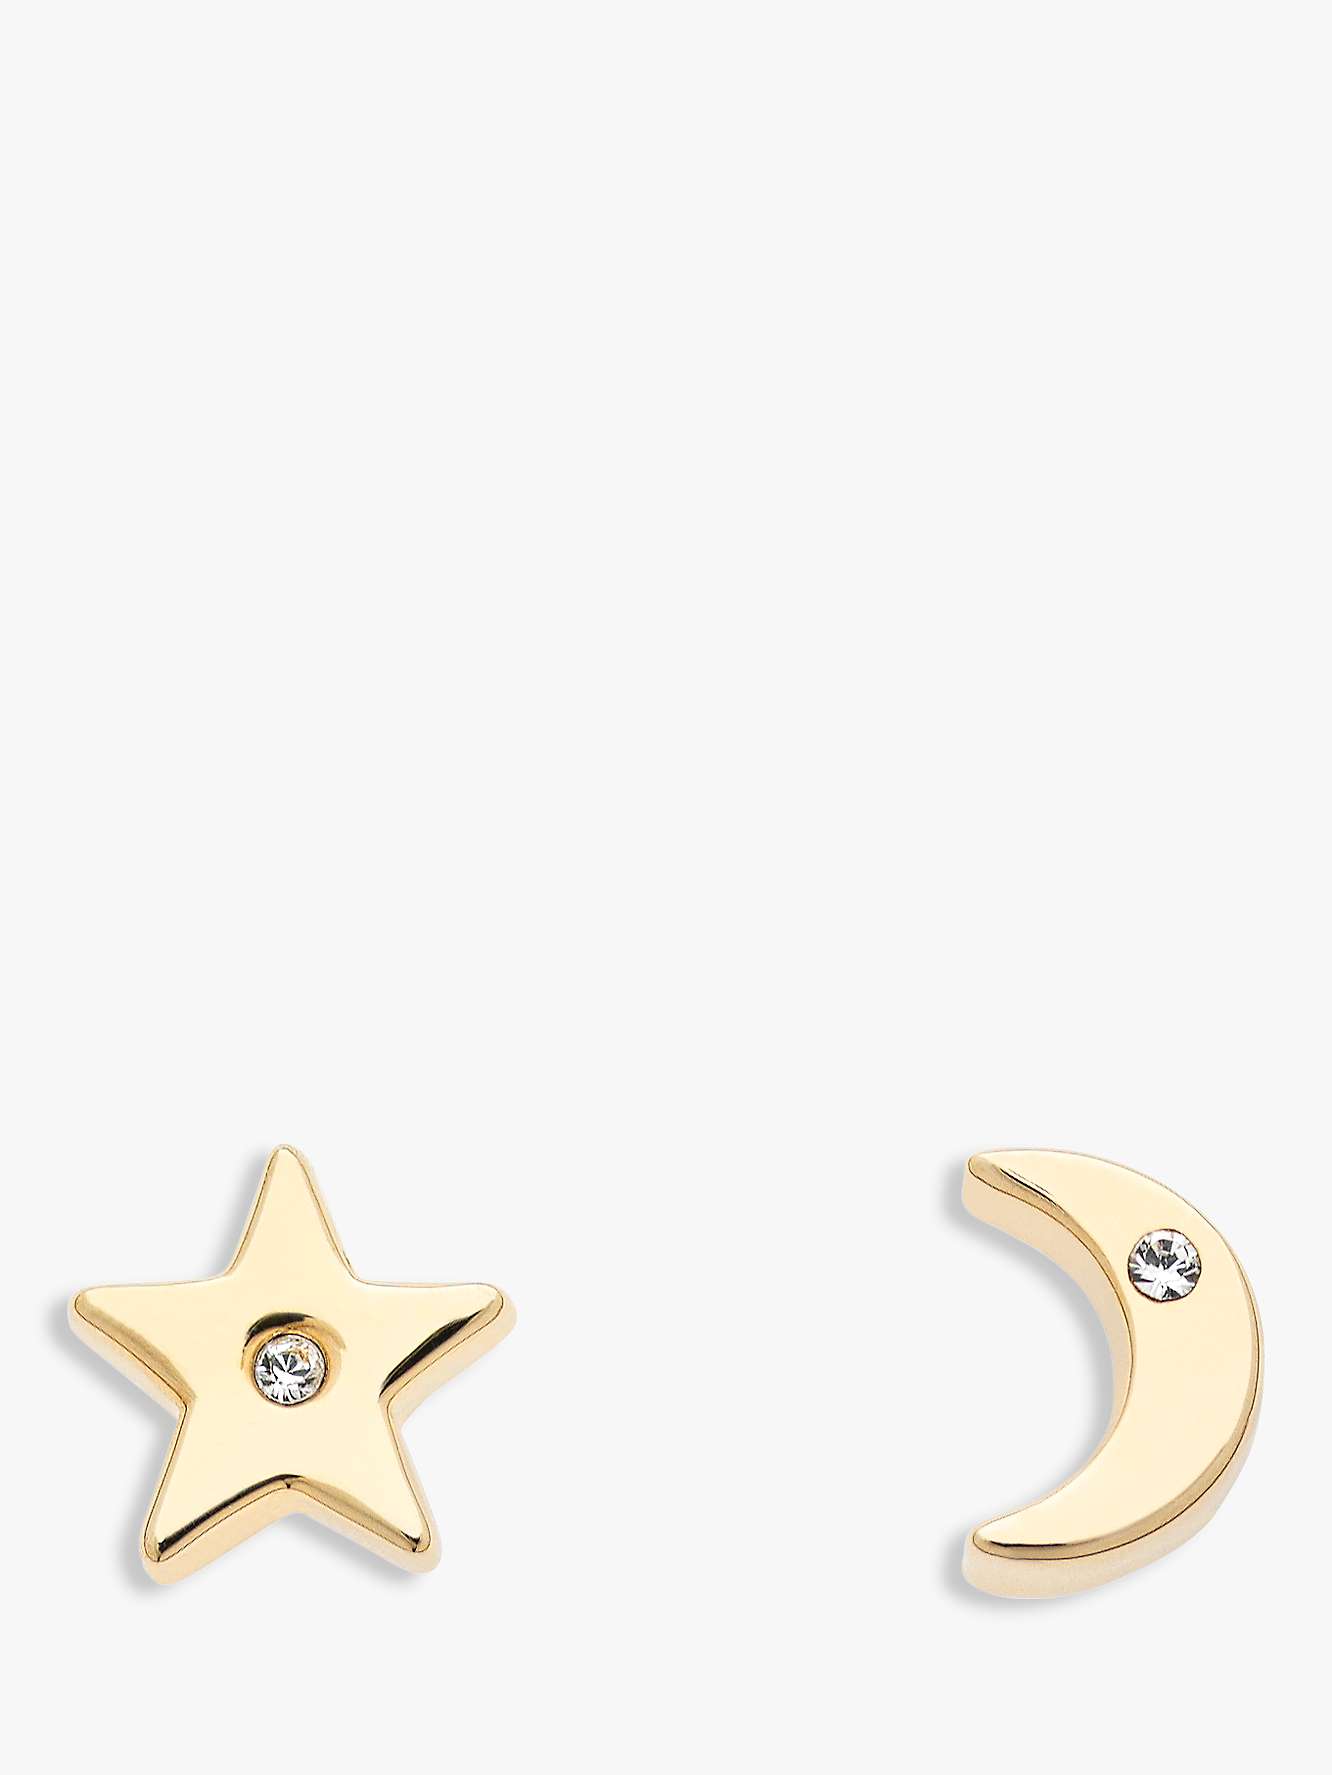 Buy Melissa Odabash Crystal Star and Crescent Moon Stud Earrings, Gold Online at johnlewis.com